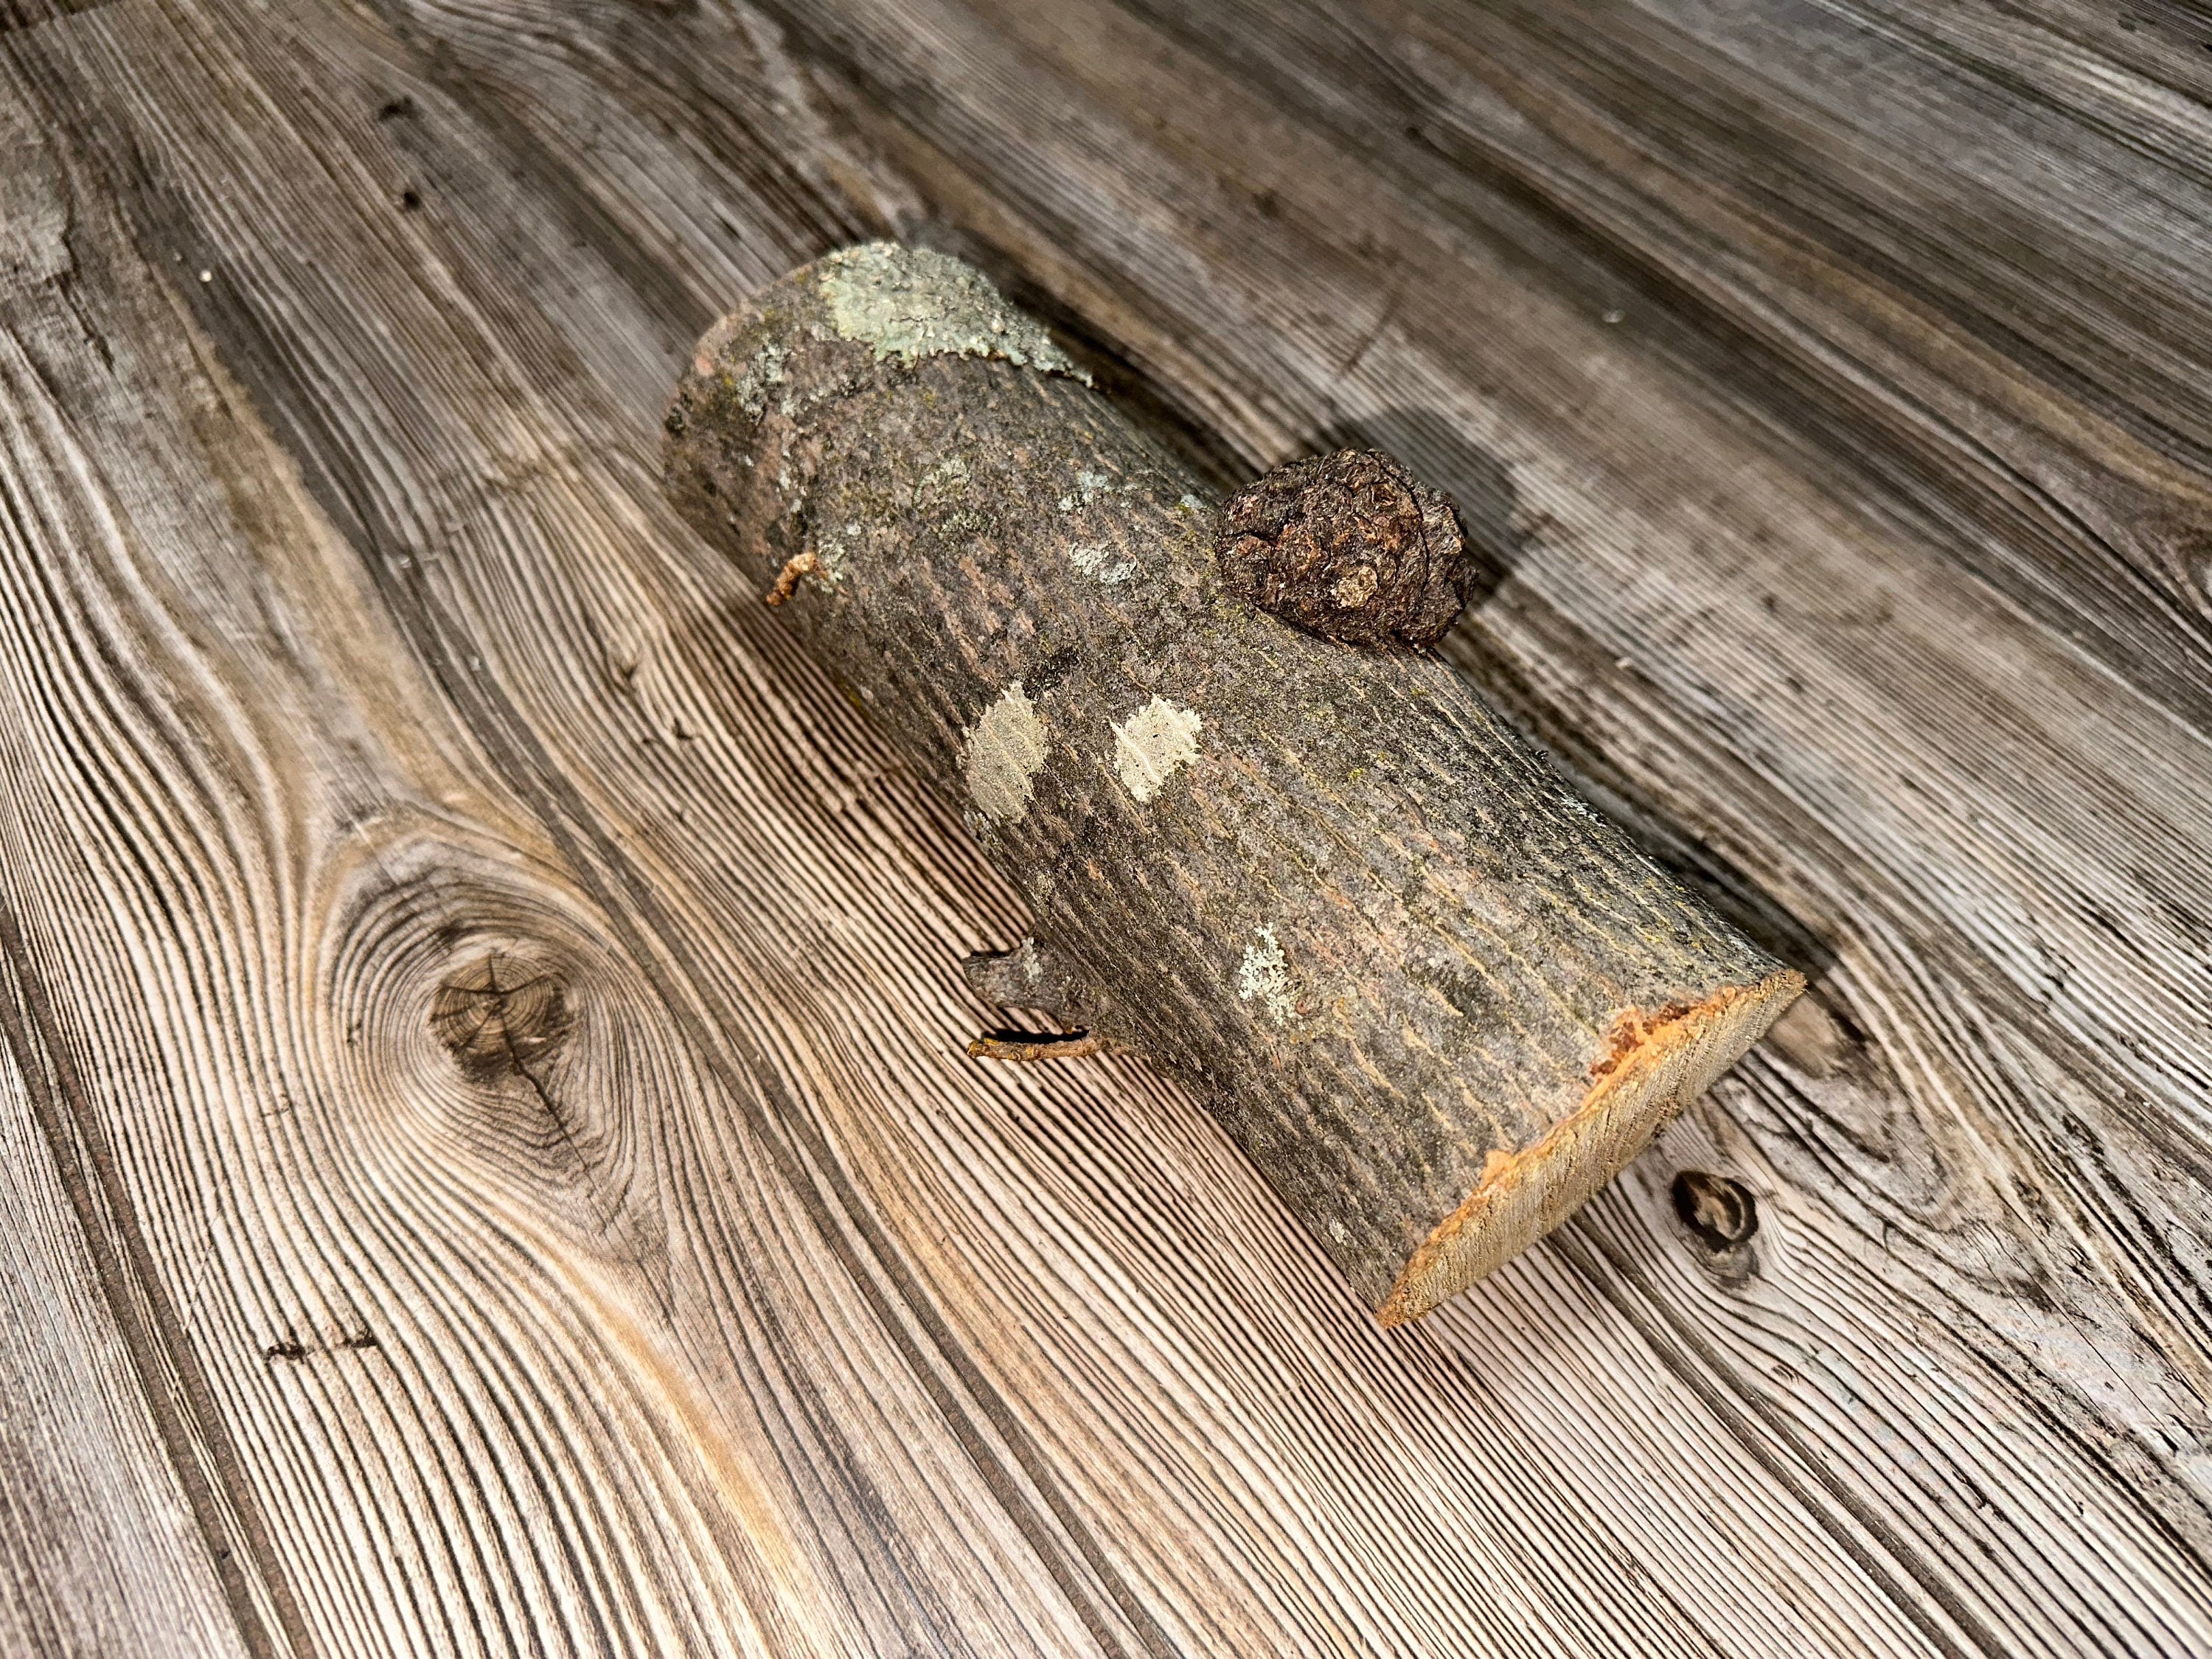 Hickory Burl Log, 8.5 Inches Long by 3 Inches Wide and 3 Inches Tall